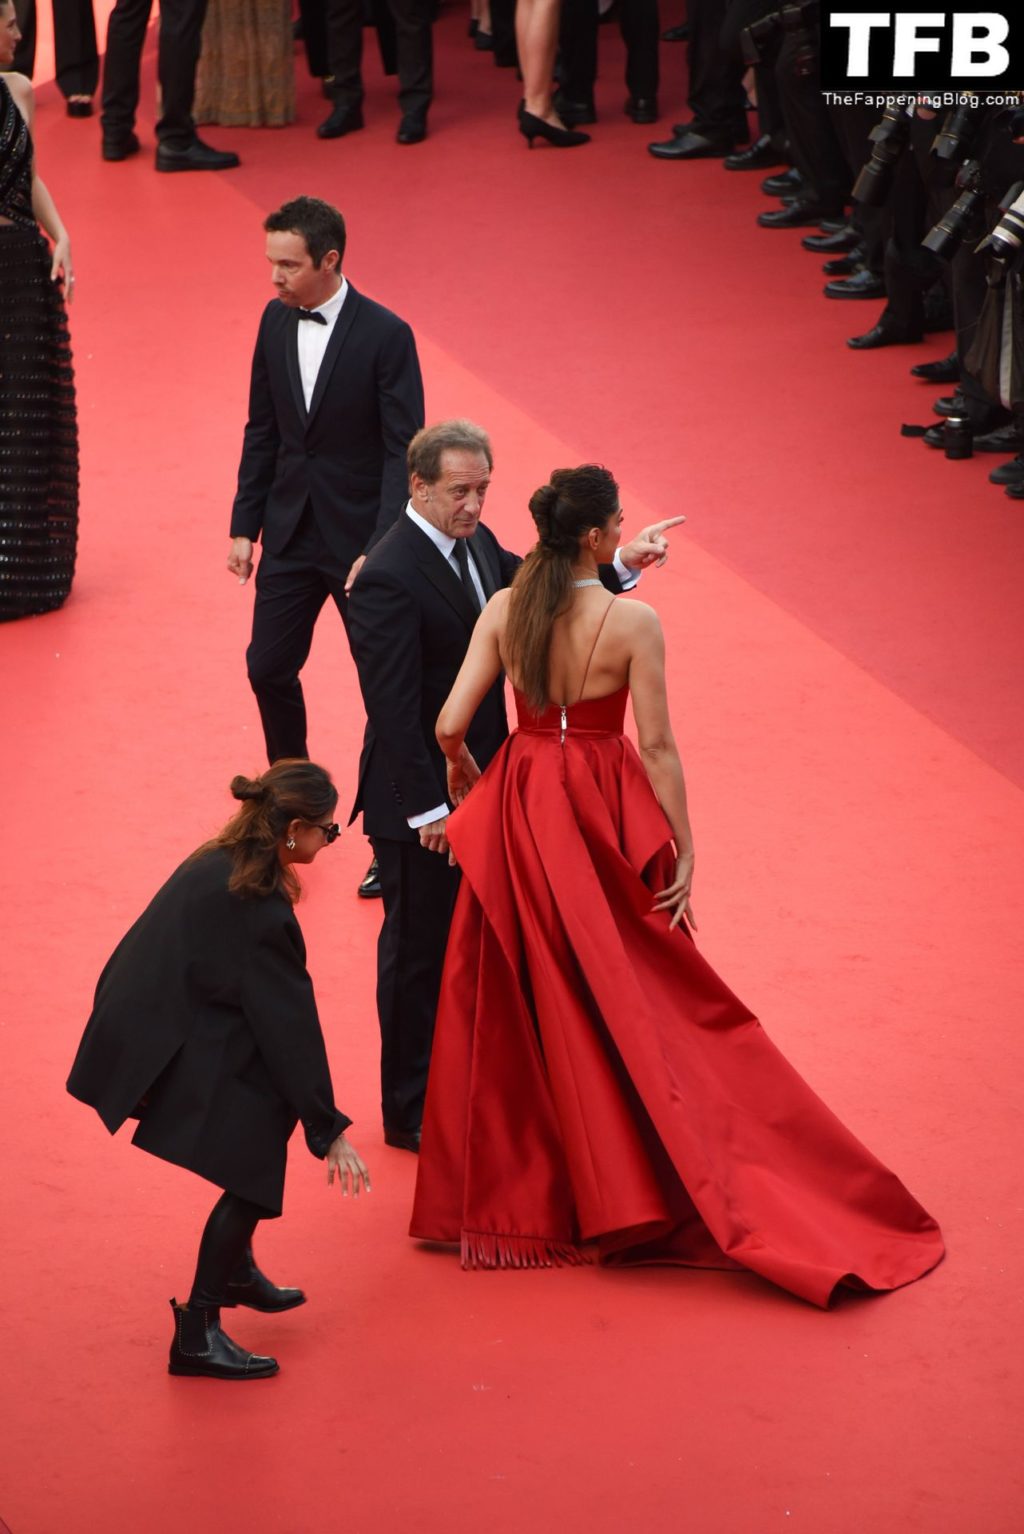 Deepika Padukone Sexy The Fappening Blog 28 1024x1534 - Deepika Padukone Looks Beautiful in a Red Dress During the 75th Annual Cannes Film Festival (150 Photos)